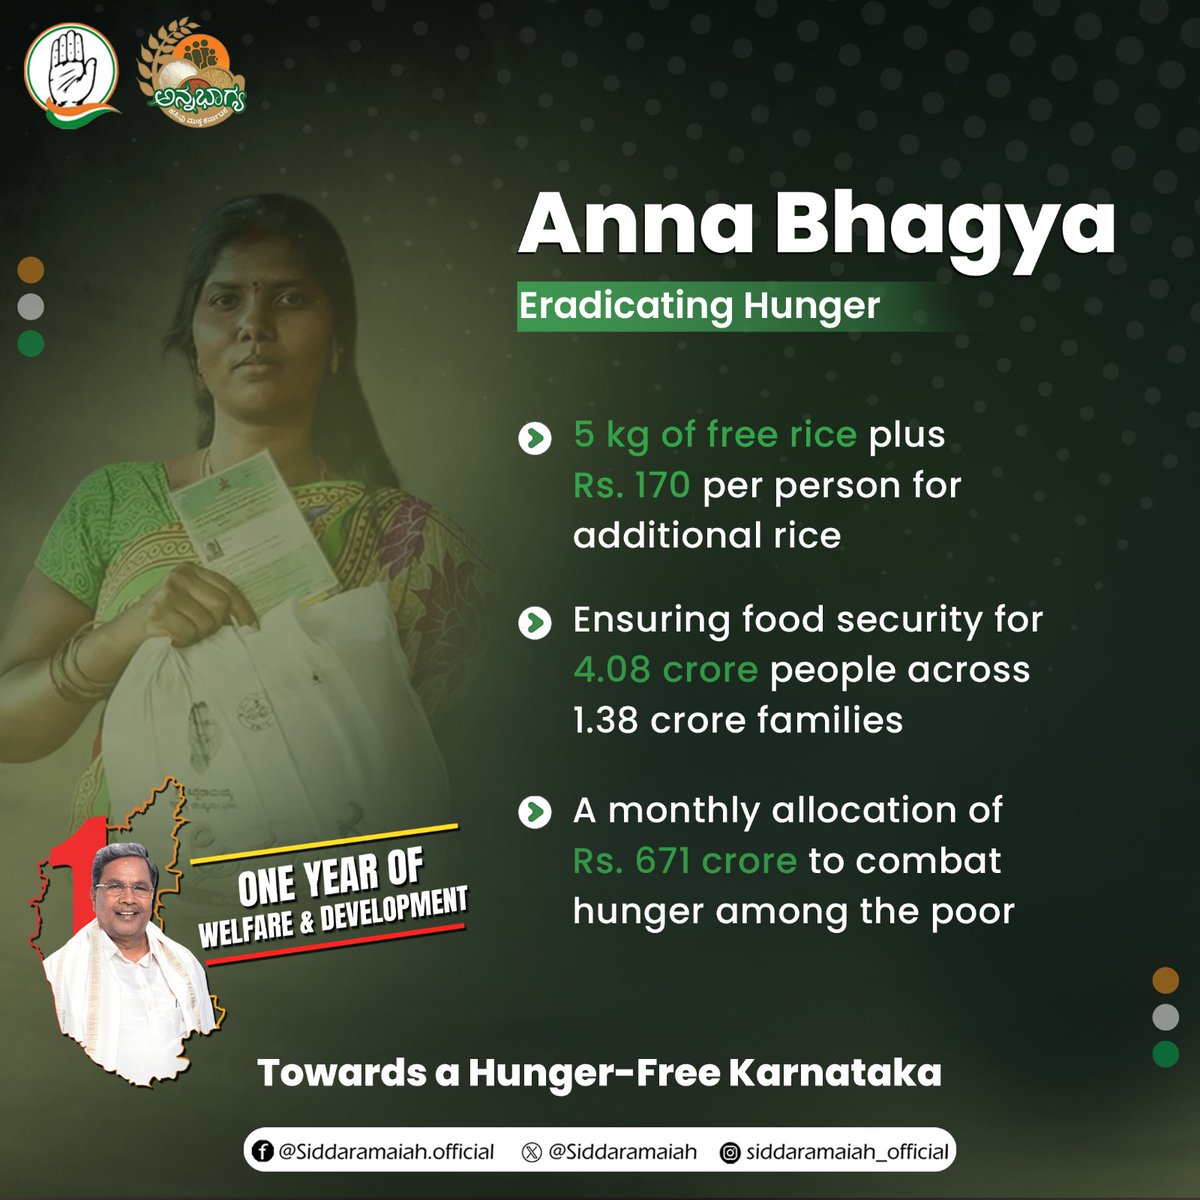 Fighting hunger with free rice and financial aid, securing food for 4.08 crore people across 1.38 crore families. A dedicated ₹671 crore monthly investment towards a hunger-free Karnataka. #ವರ್ಷ‌ಒಂದು_ಹರ್ಷ‌ಎಂದೆಂದು